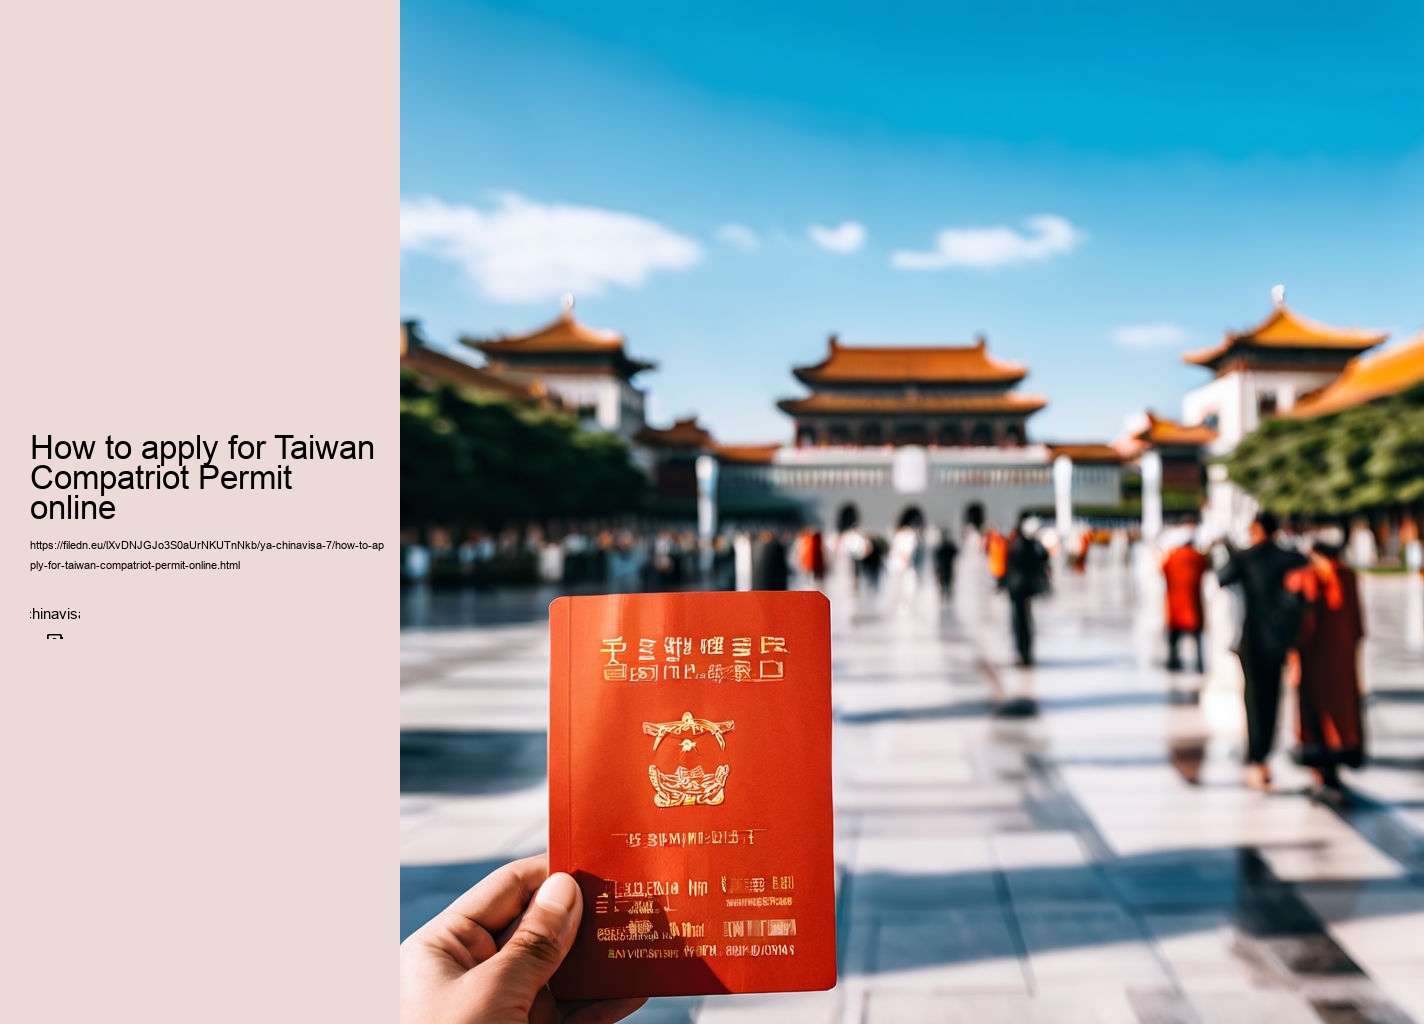 How to apply for Taiwan Compatriot Permit online